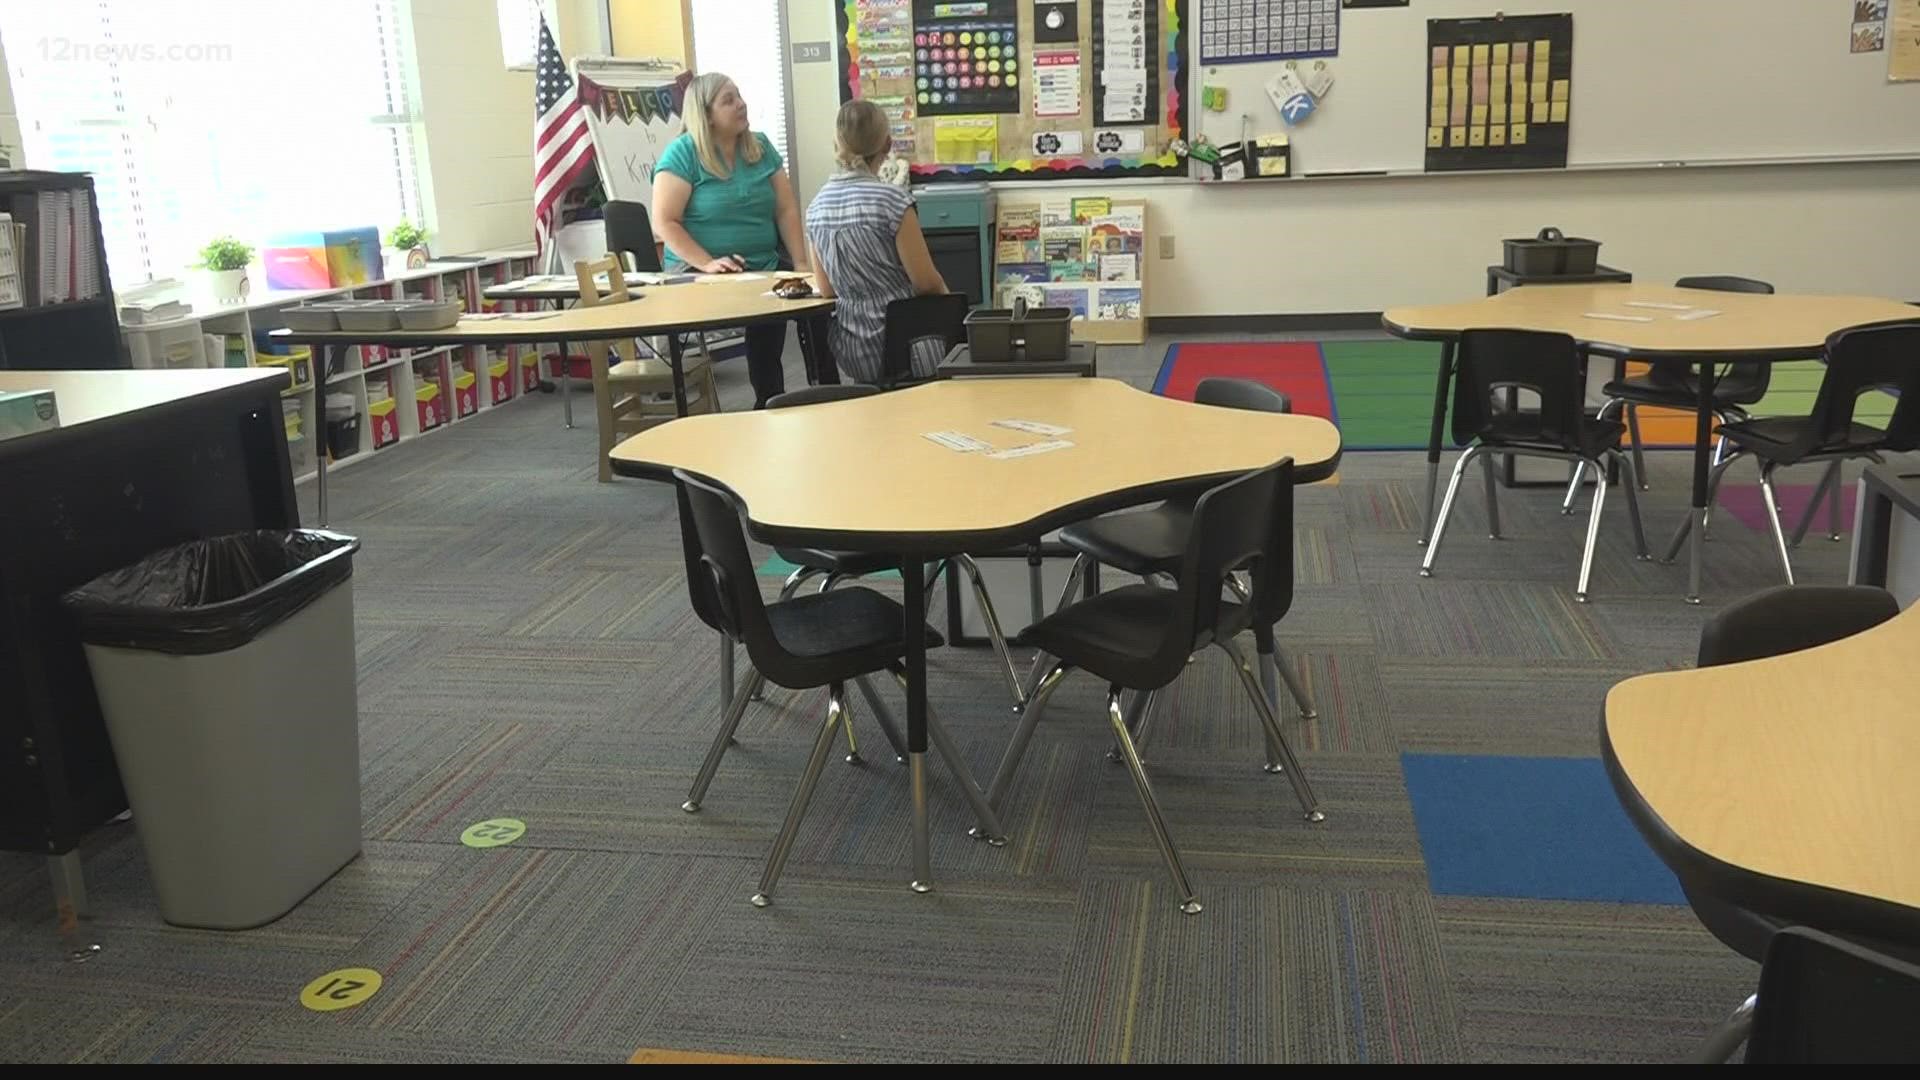 The 2021-22 school year is becoming a record for kindergarten enrollment. So how are Arizona schools handling the surge in enrollment?